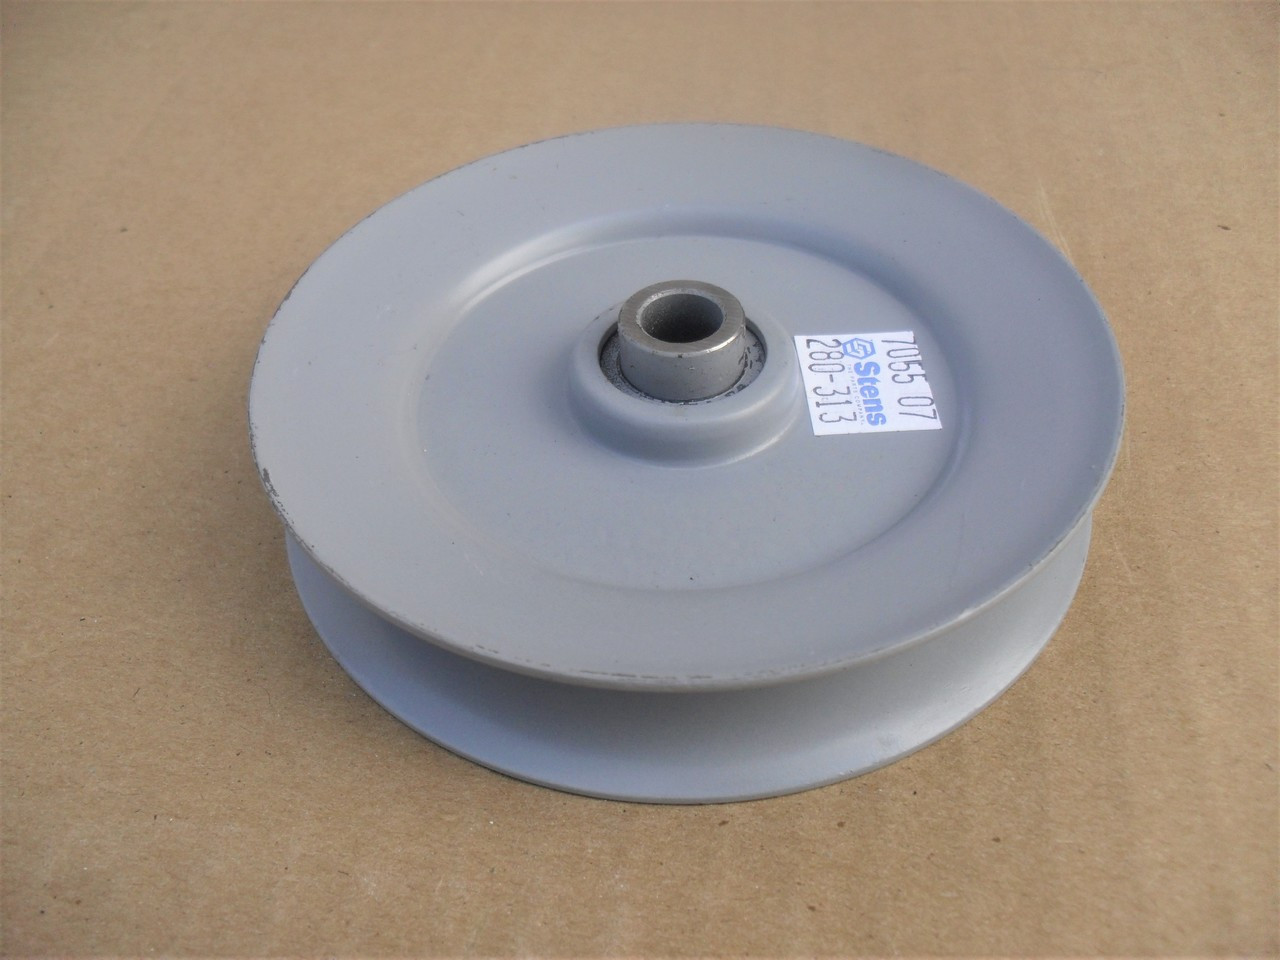 Idler Pulley for Cub Cadet, MTD 756-0226, 756-0293, 756-0293A, 756-0487, 1726660 Height 7/8", ID 3/8", OD 4" Made In USA